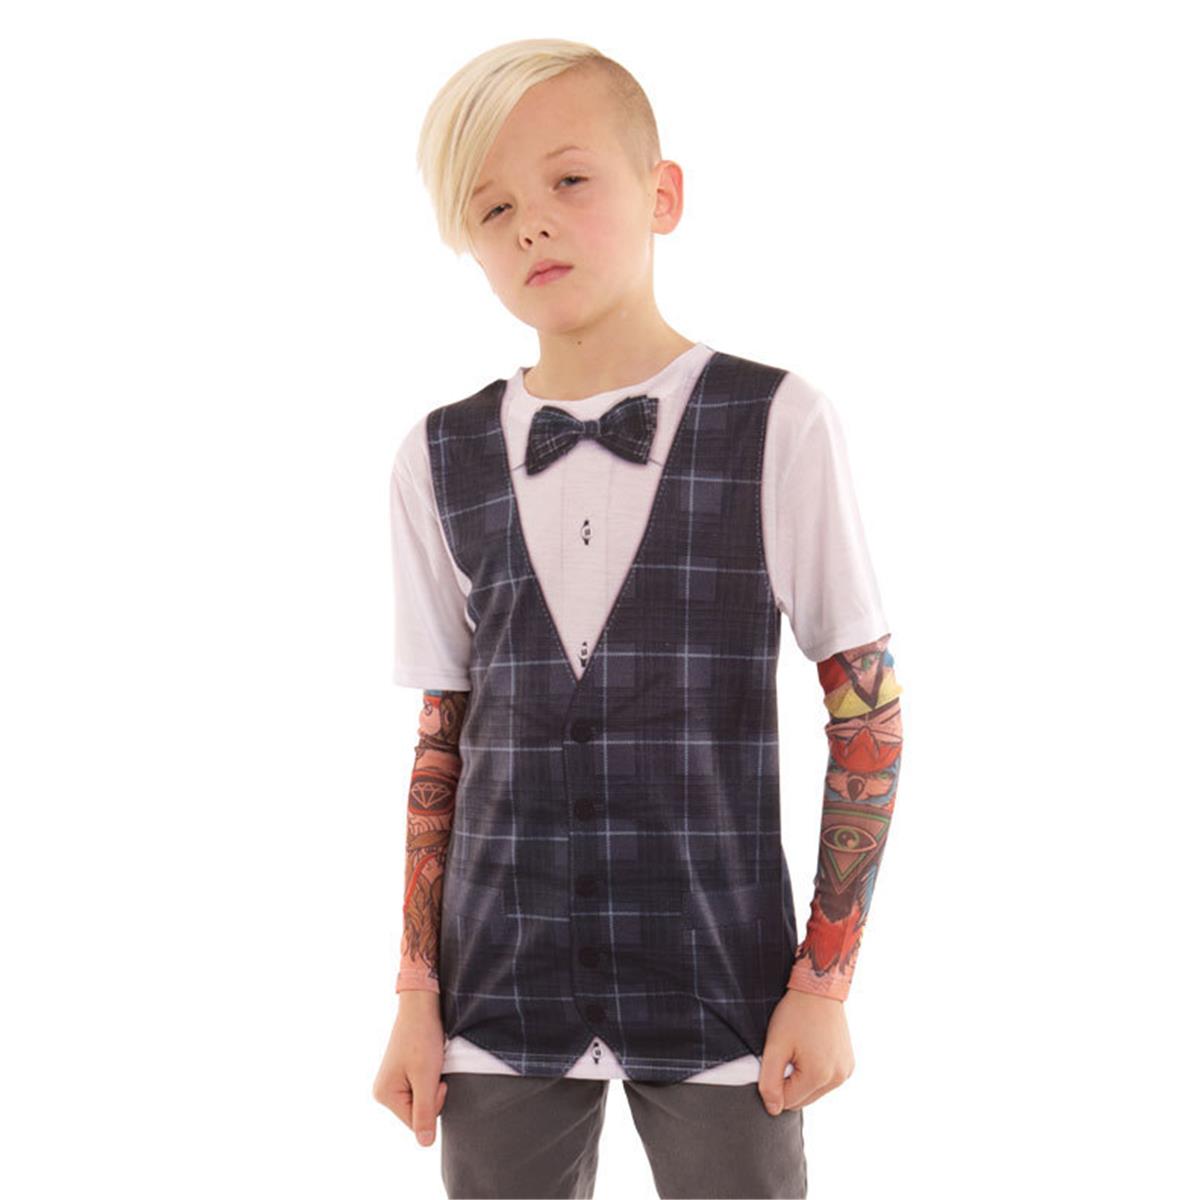 F134199-s Youth Hipster Vest With Tattoo, Black - Small